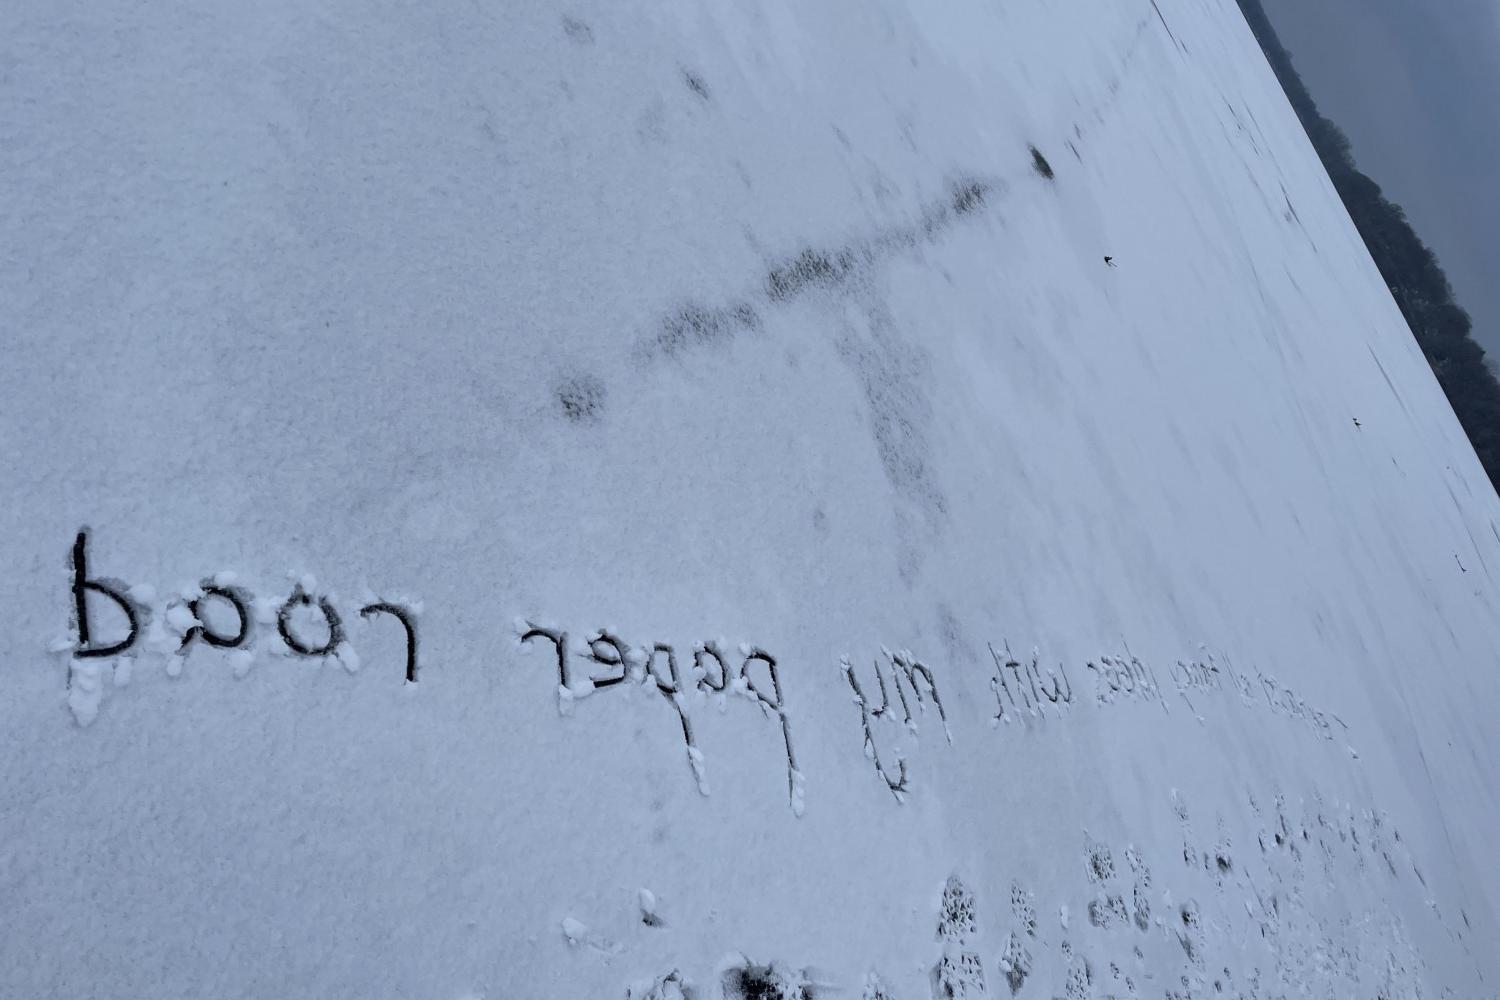 Writing in the snow composed during Writing/Walking/Winter class.